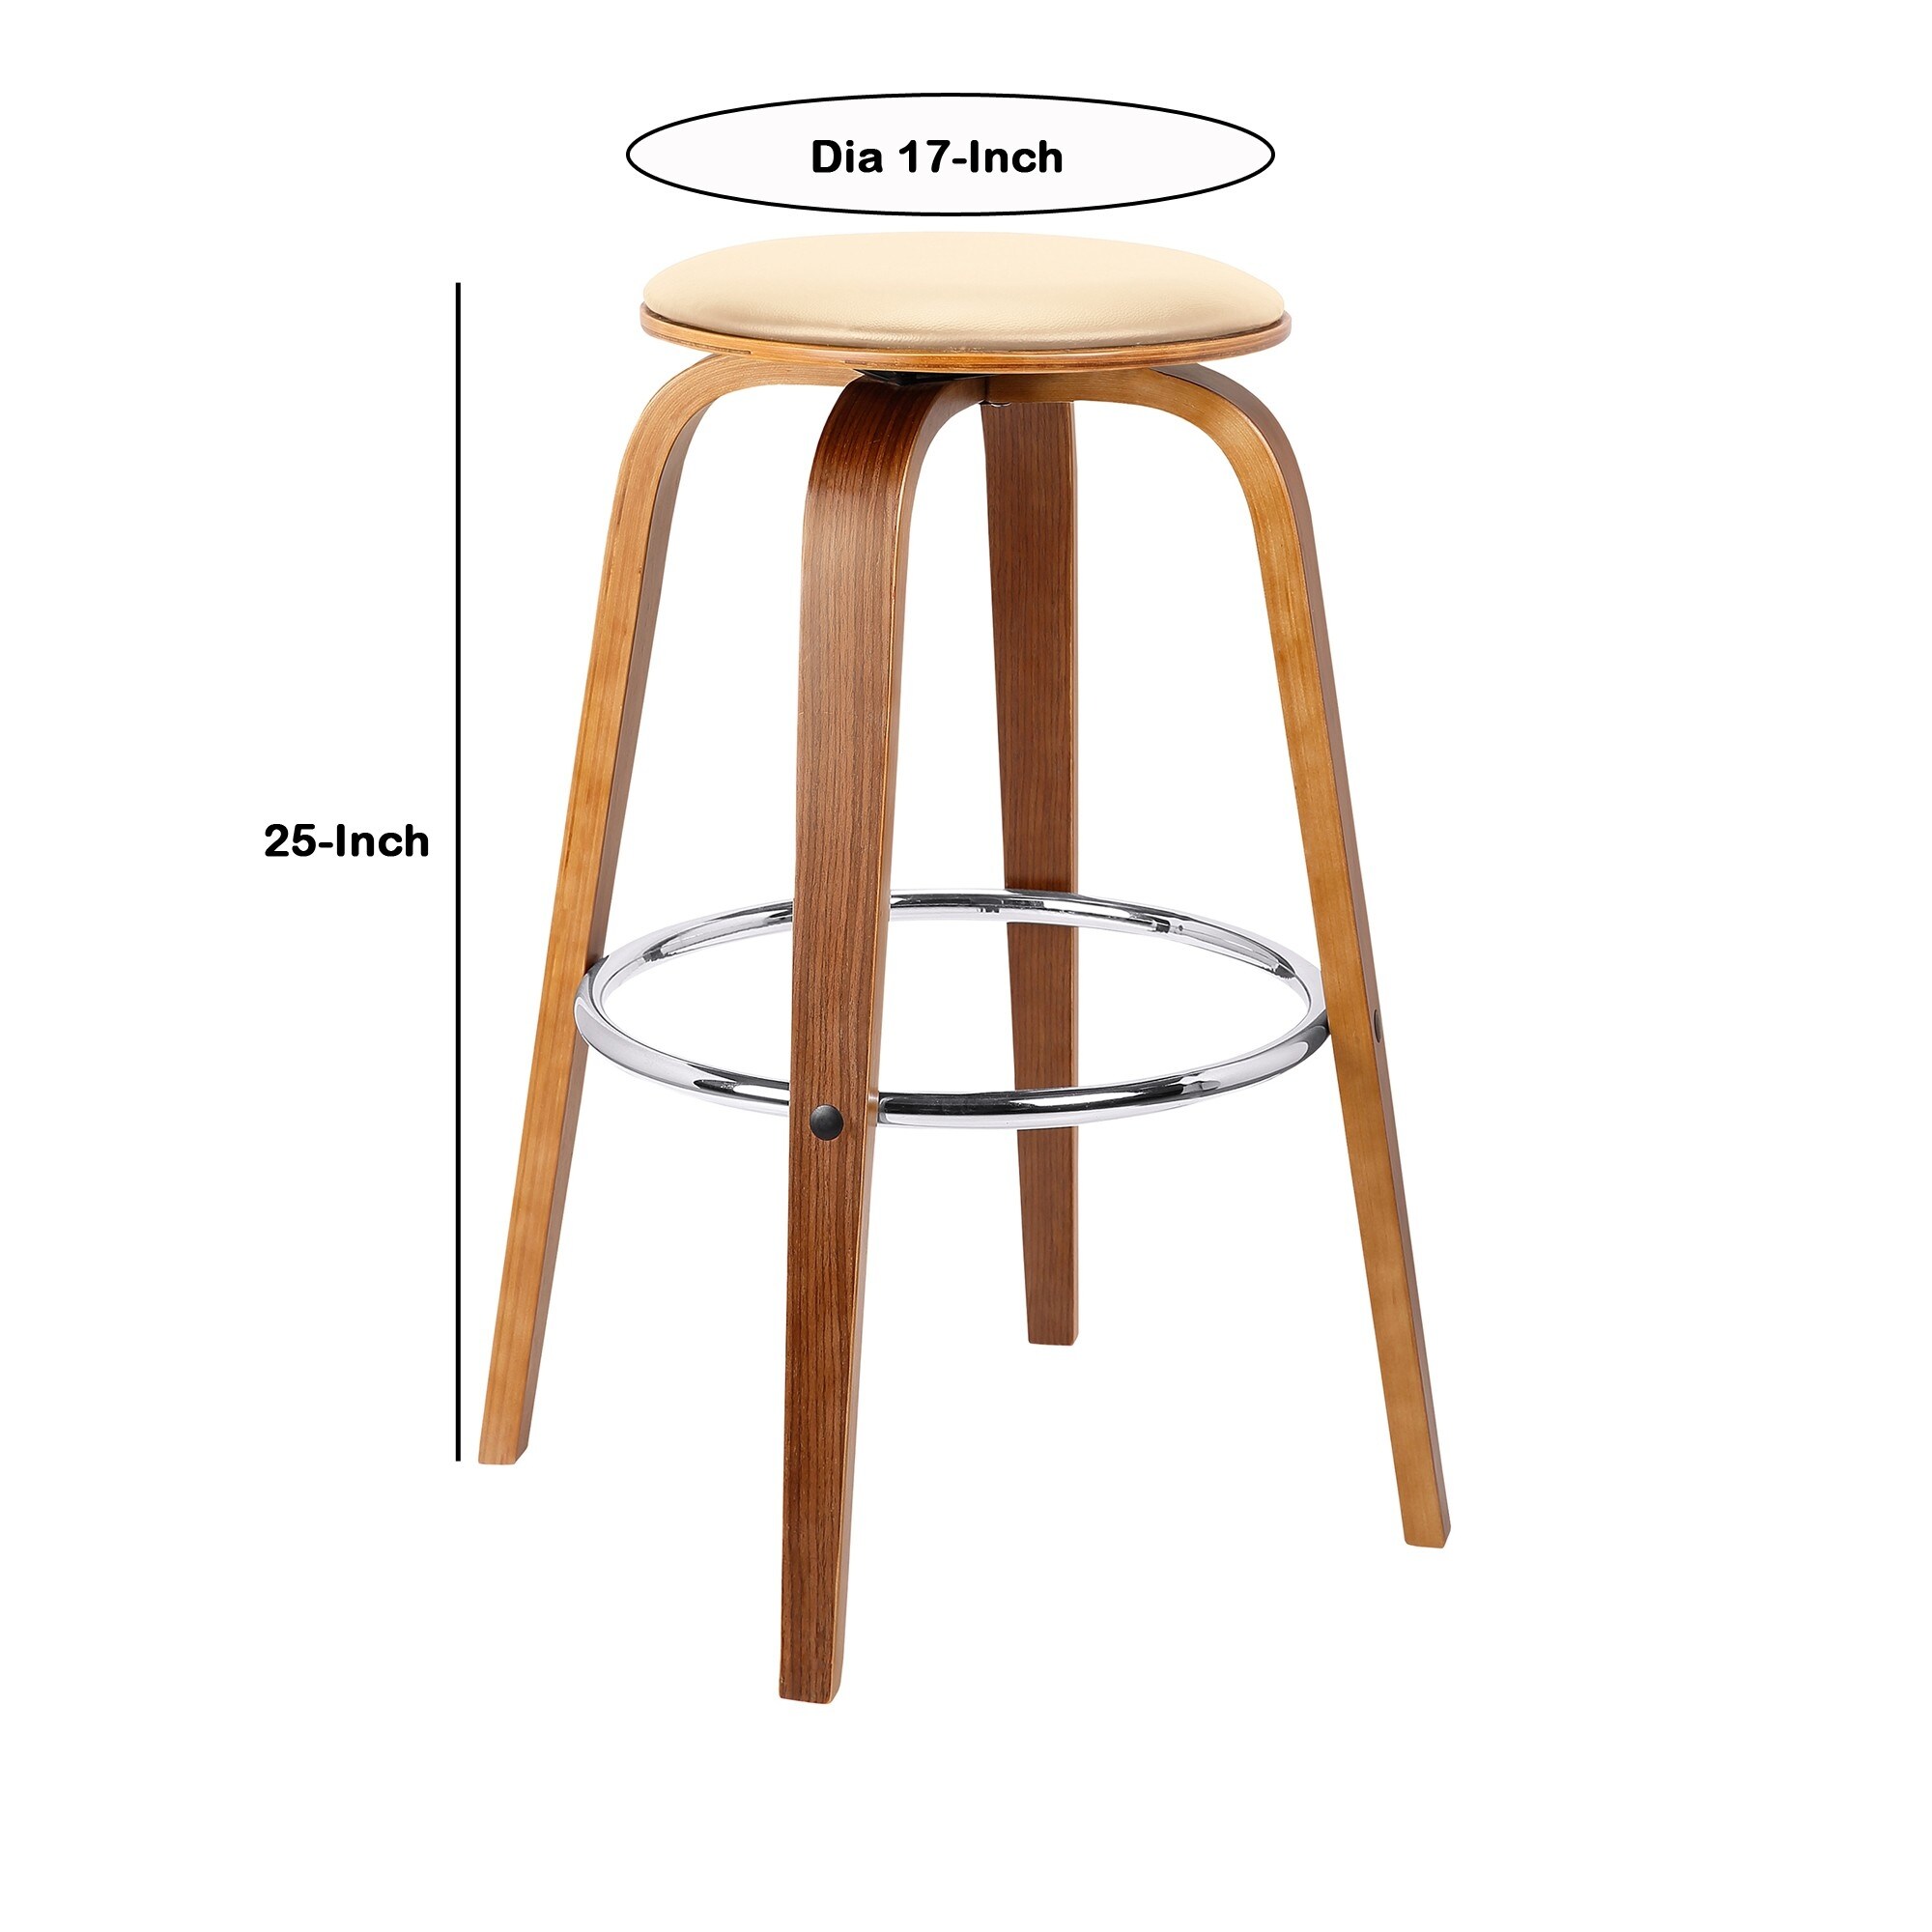 Round Leatherette Wooden Counter Stool with Flared Legs, Brown and Cream